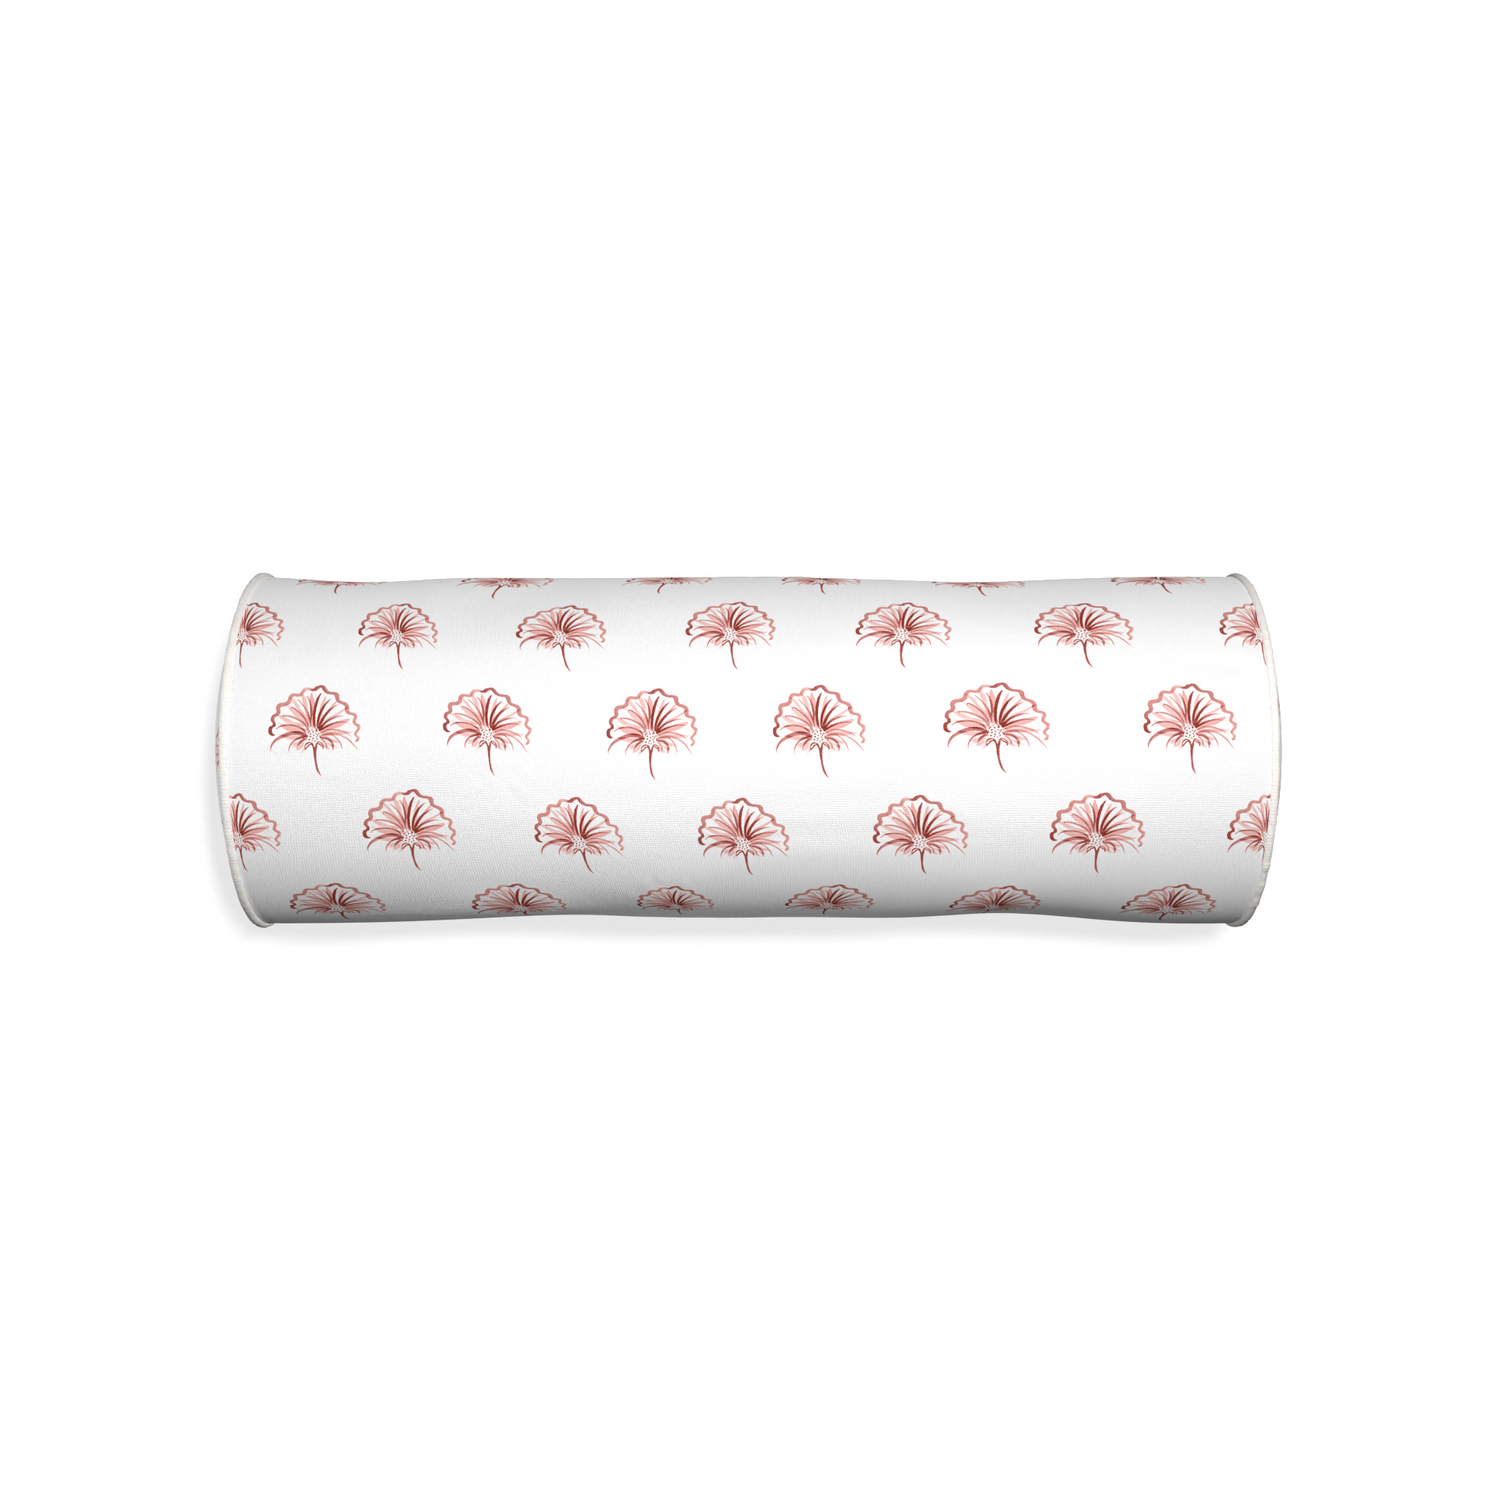 Bolster penelope rose custom floral pinkpillow with snow piping on white background